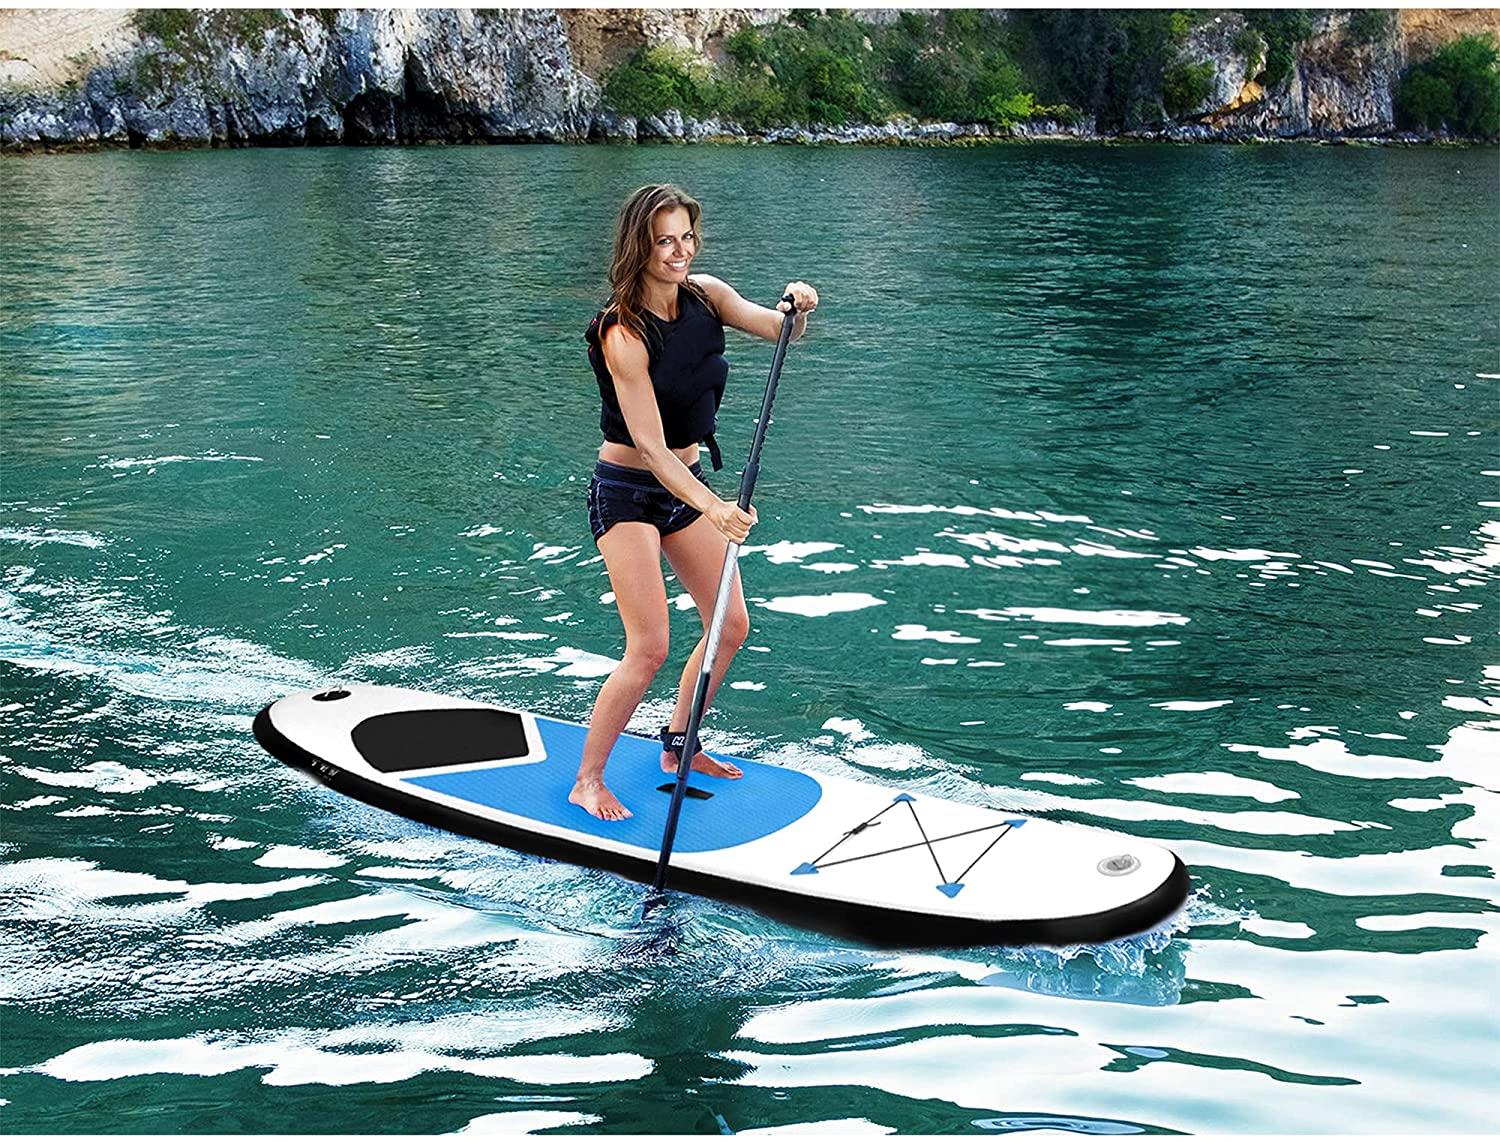 Blue Inflatable 305cm SUP Stand Up Paddle Board Surf Board by Geezy - The Magic Toy Shop